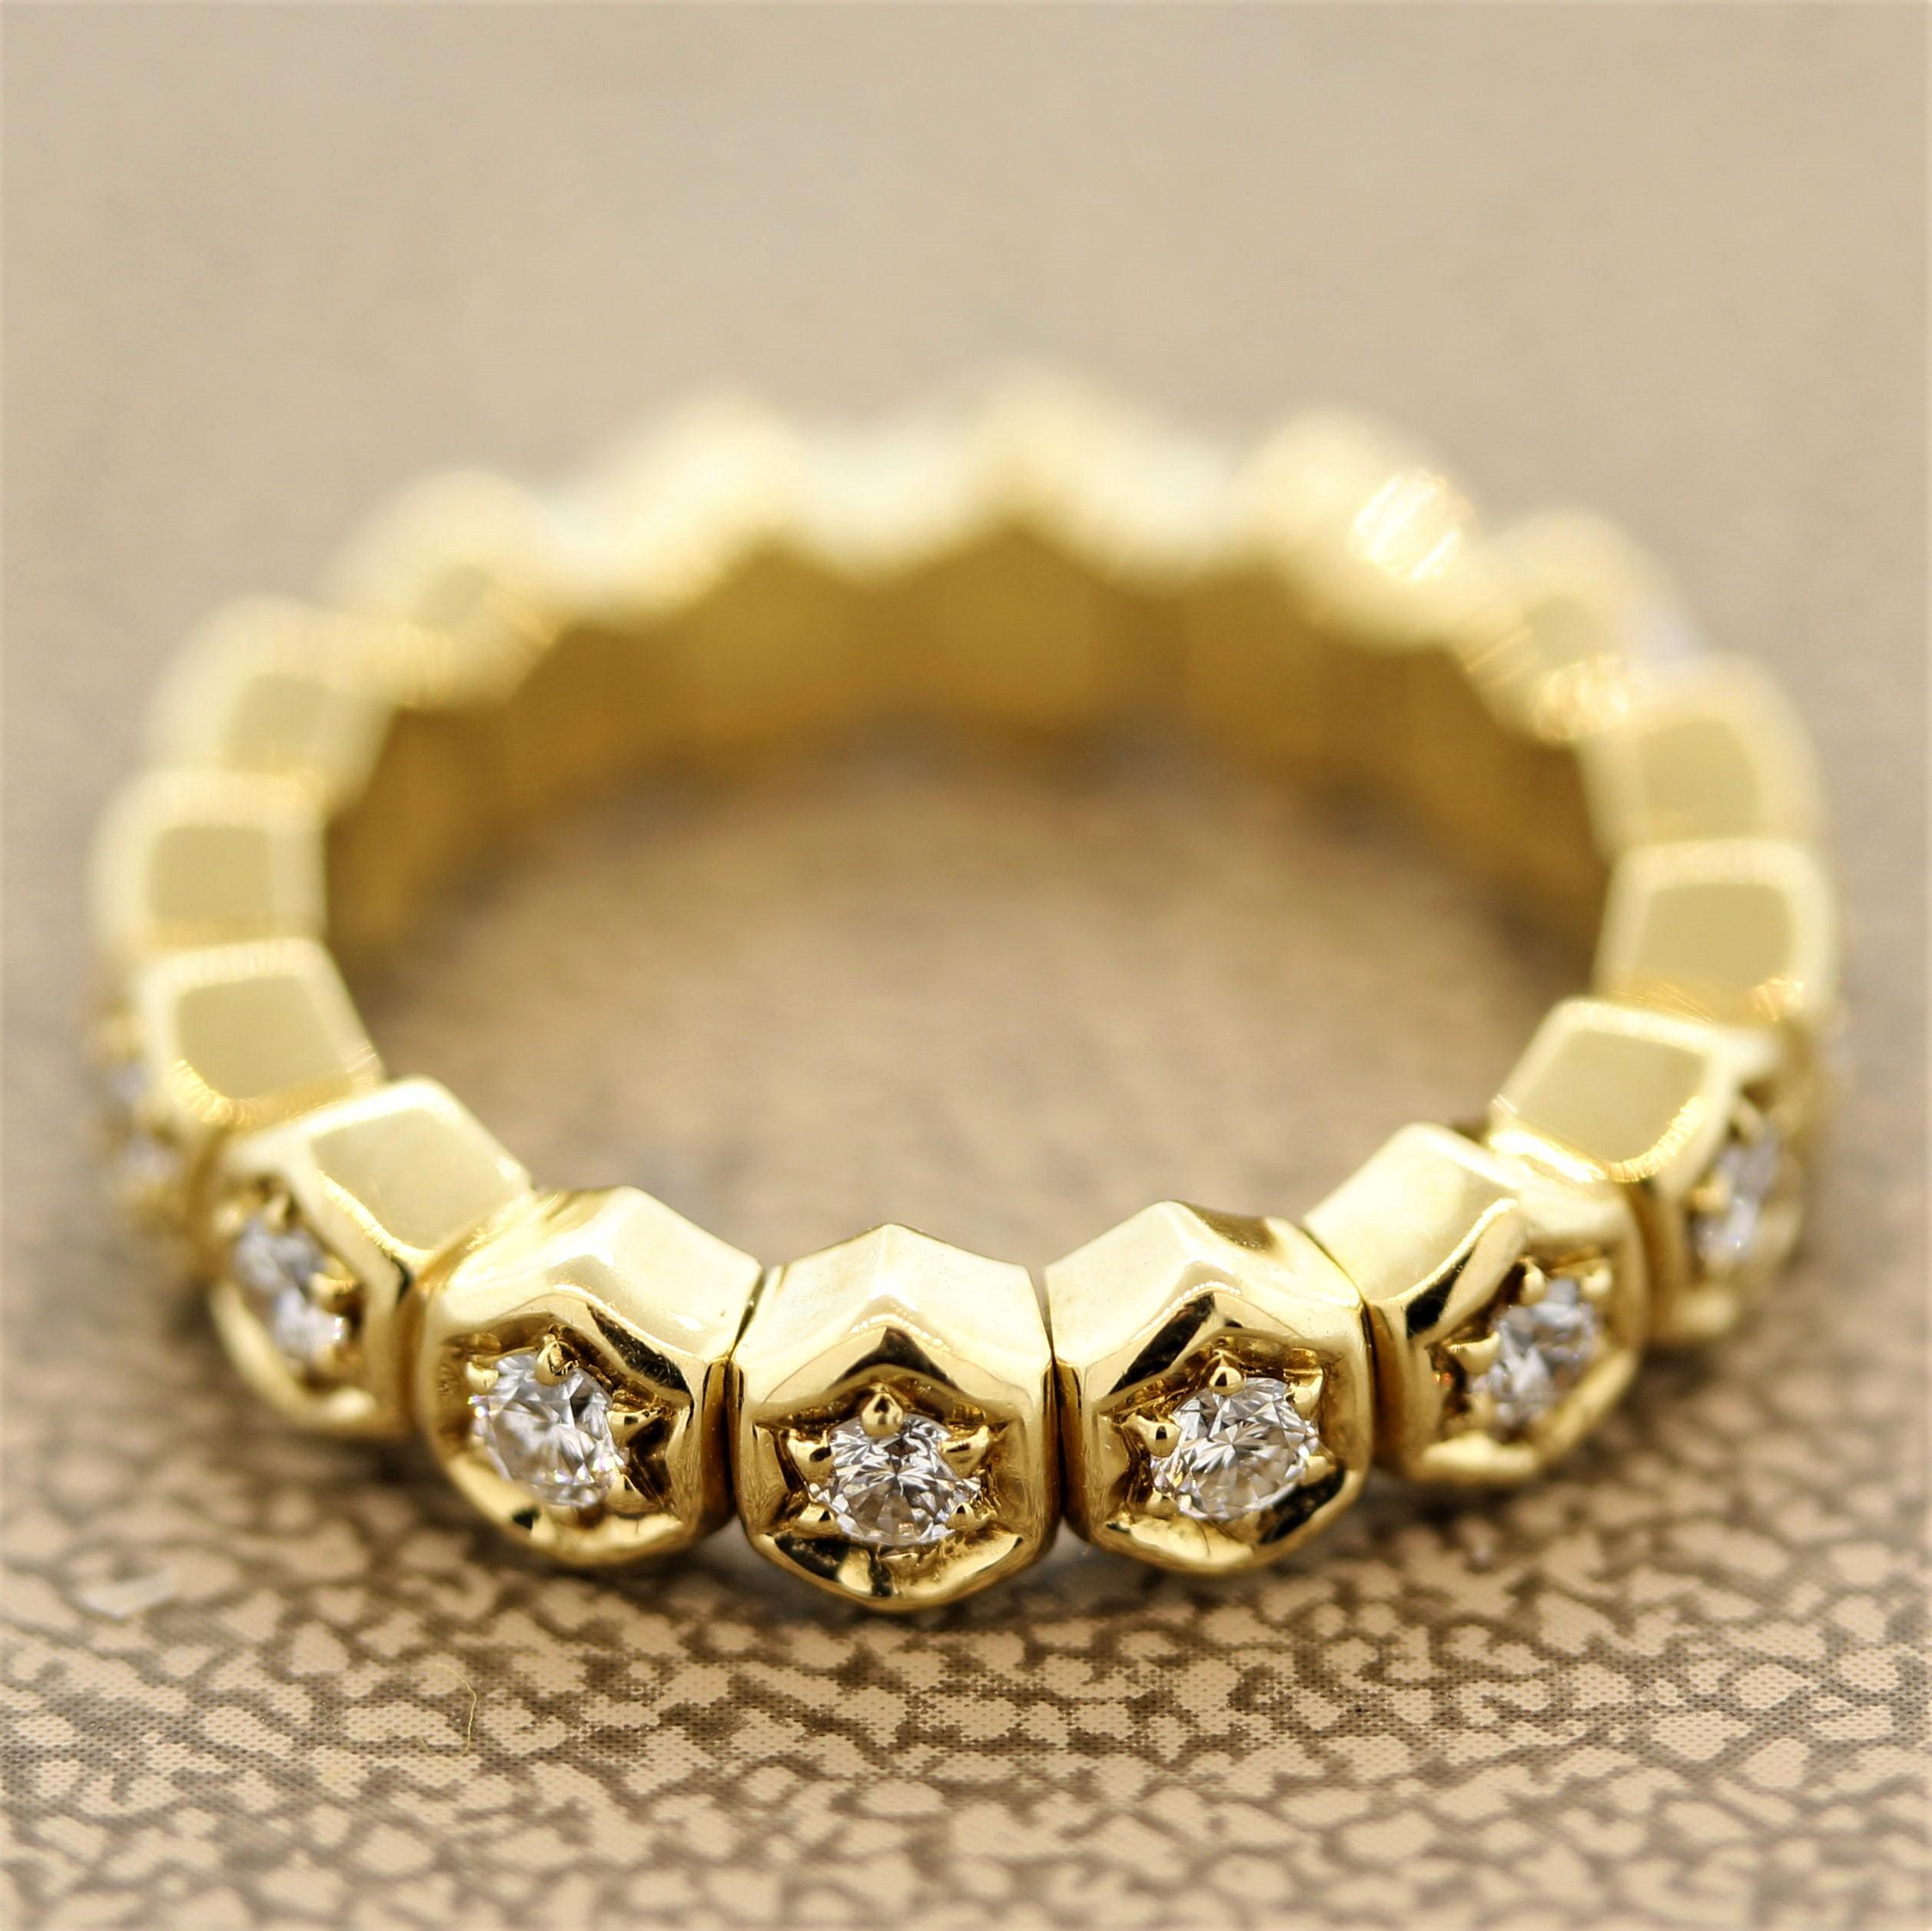 An original ring by Swiss designers Piaget. It features 16 round brilliant cut diamonds weighing a total of 0.48 carats. Each diamond is set in a hexagonal sculpted gold setting. Made in 18k yellow gold, circa 1996.

Ring Size 5